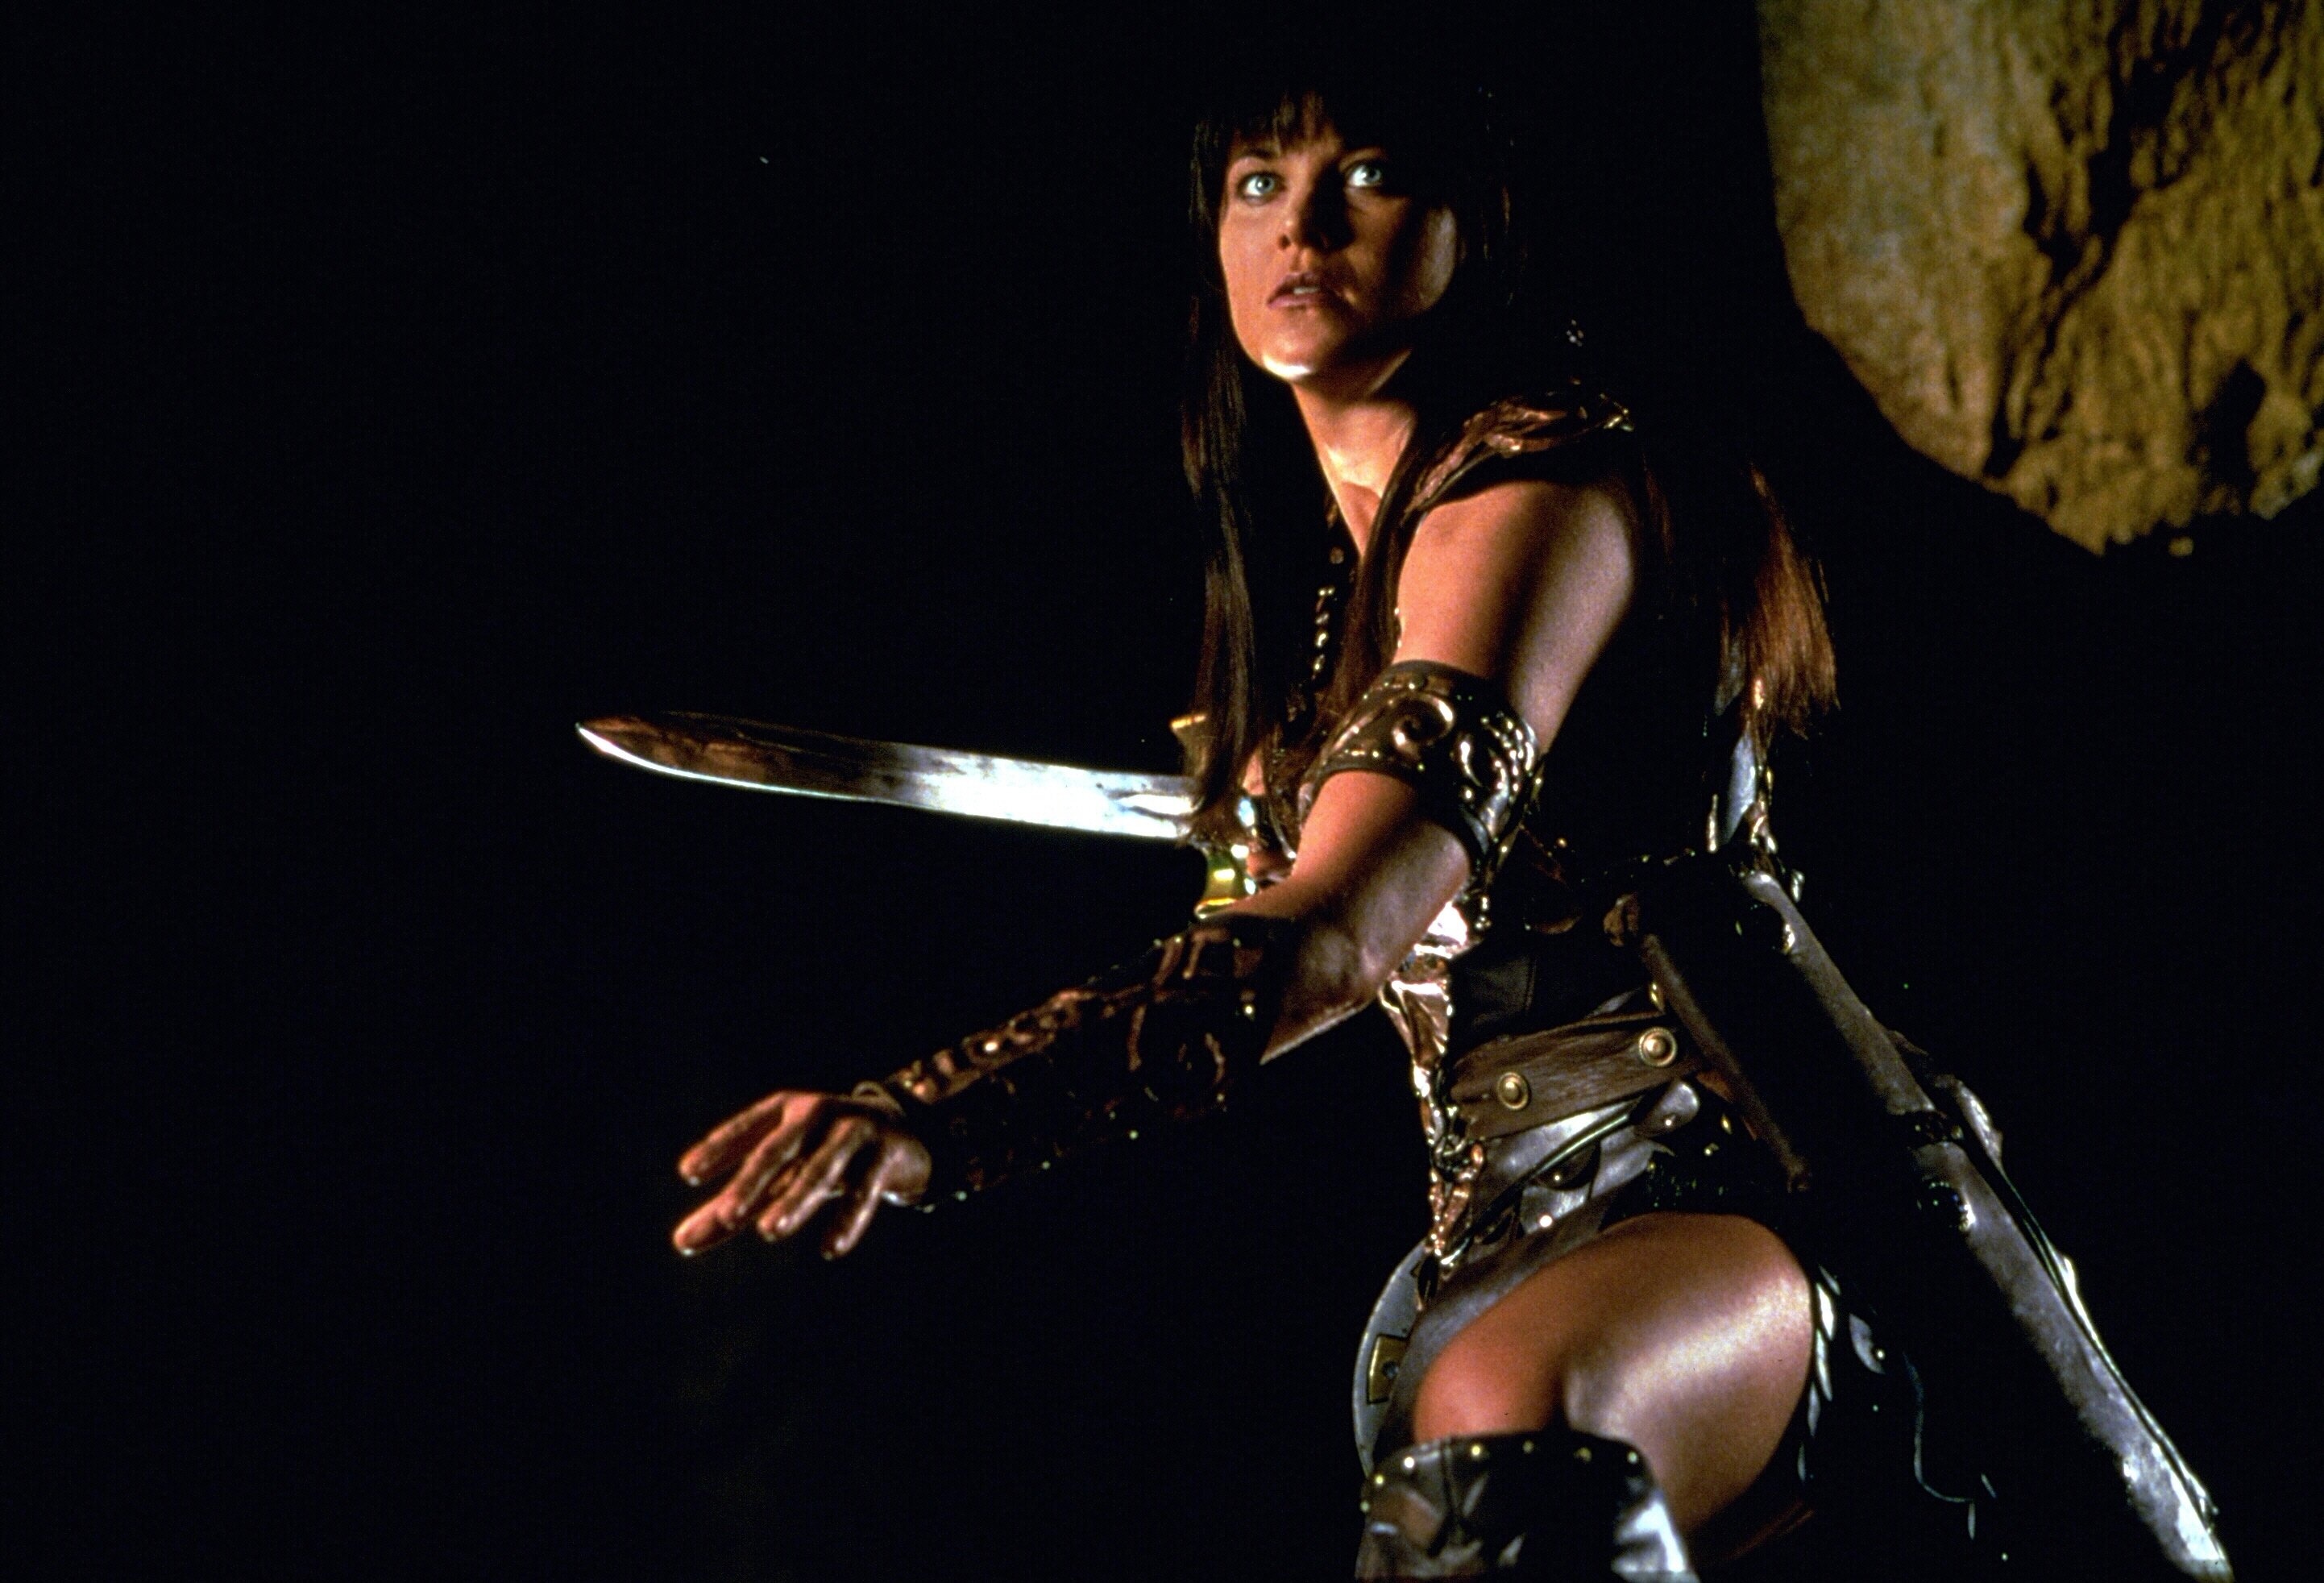 Lucy Lawless: Xena, A fictional character from Robert Tapert's “Xena: Warrior Princess franchise”, 1995-2001. 2890x1970 HD Background.